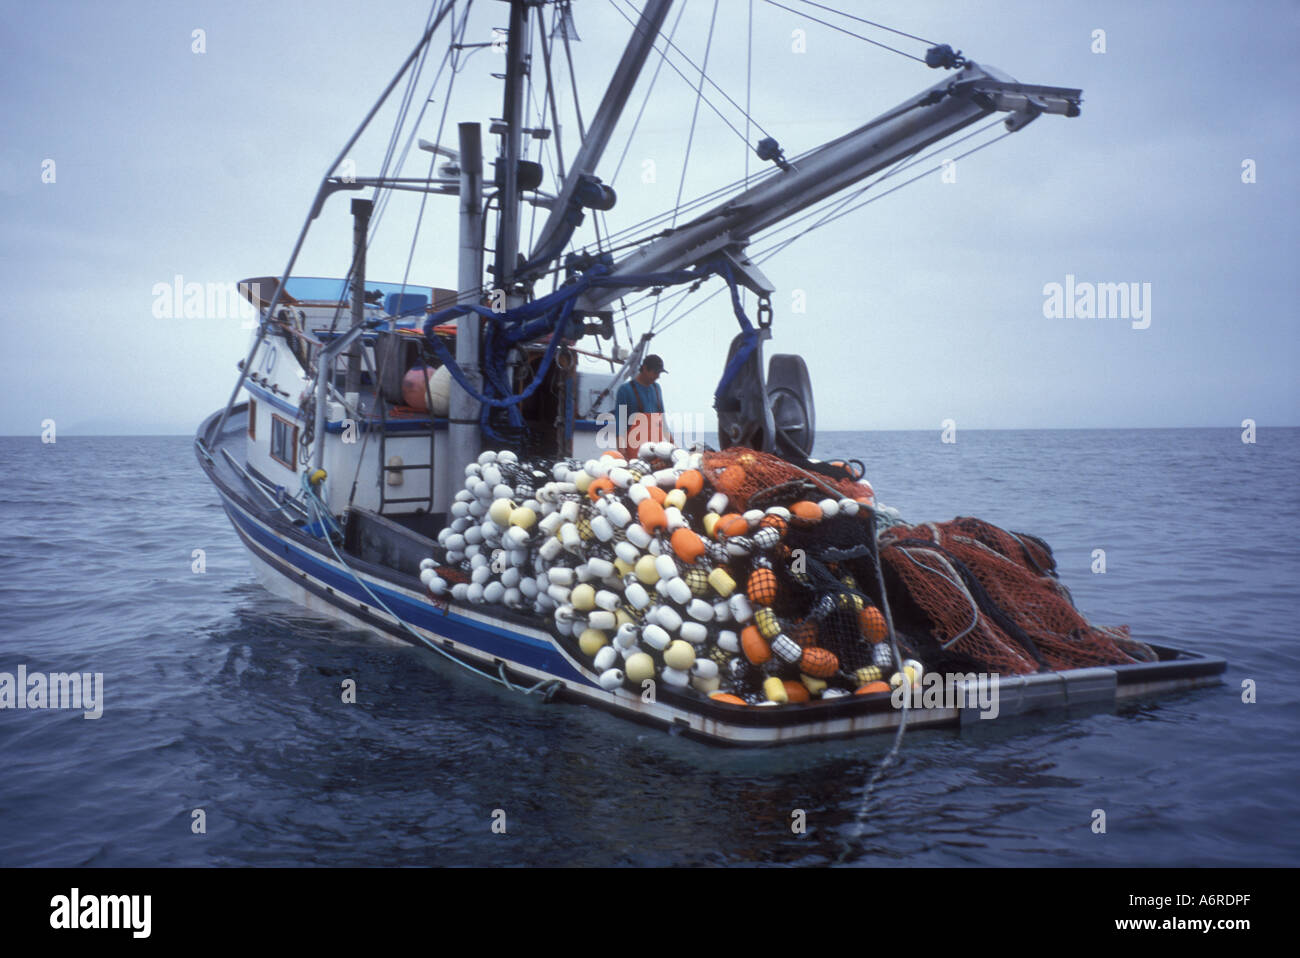 Salmon seiner fishing vessel loaded heavy with fish and nets in waters off Kodiak Island Pacific ocean Alaska Stock Photo